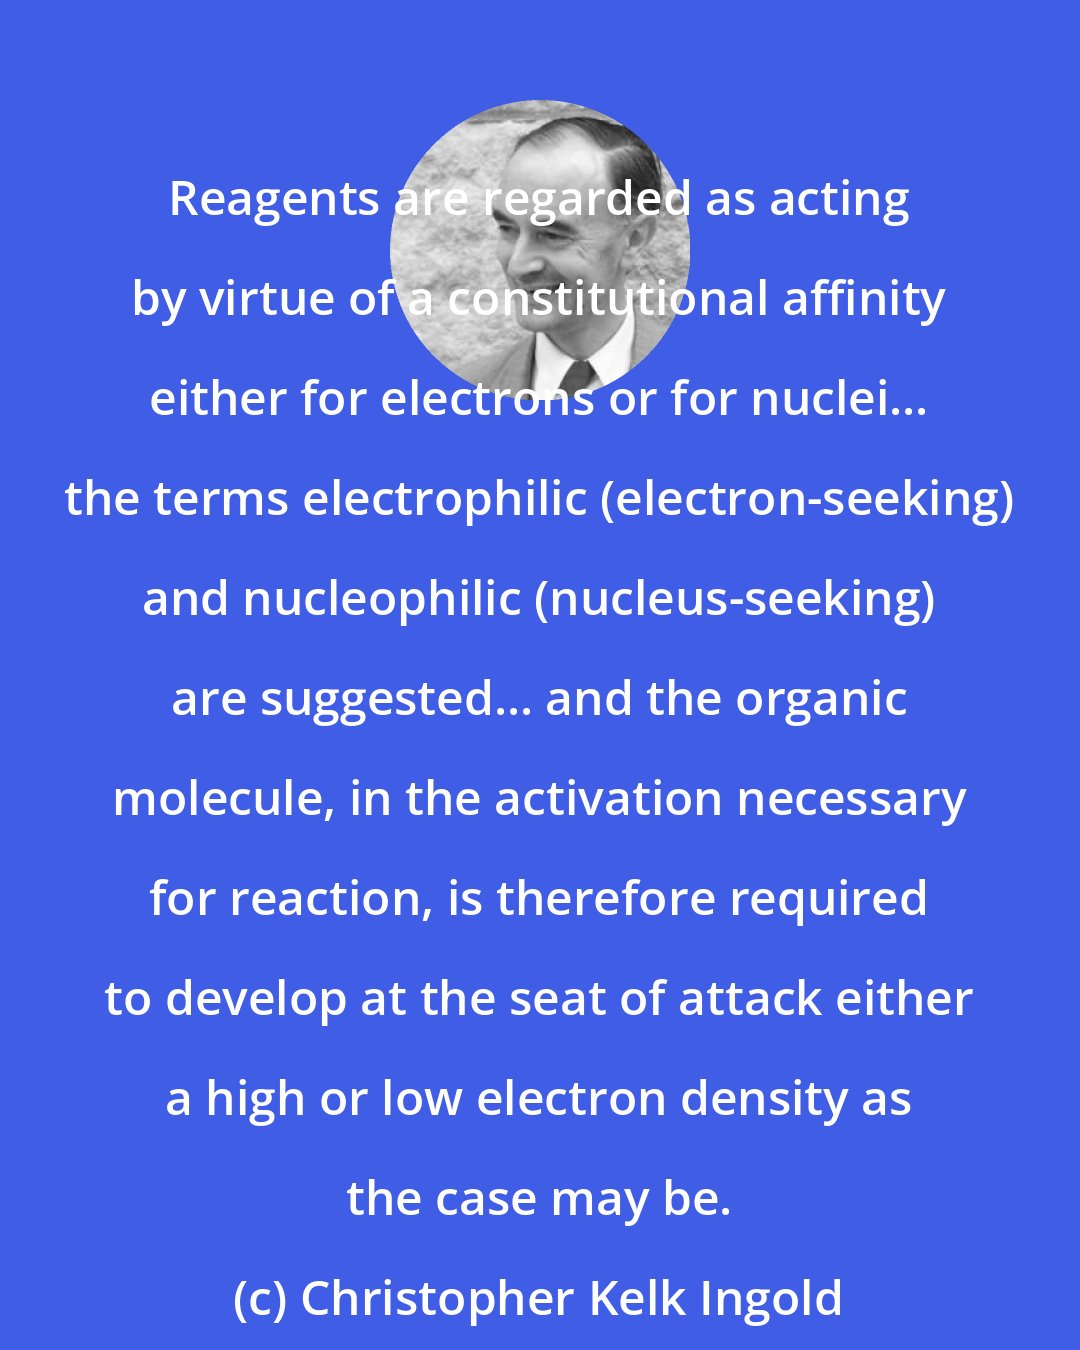 Christopher Kelk Ingold: Reagents are regarded as acting by virtue of a constitutional affinity either for electrons or for nuclei... the terms electrophilic (electron-seeking) and nucleophilic (nucleus-seeking) are suggested... and the organic molecule, in the activation necessary for reaction, is therefore required to develop at the seat of attack either a high or low electron density as the case may be.